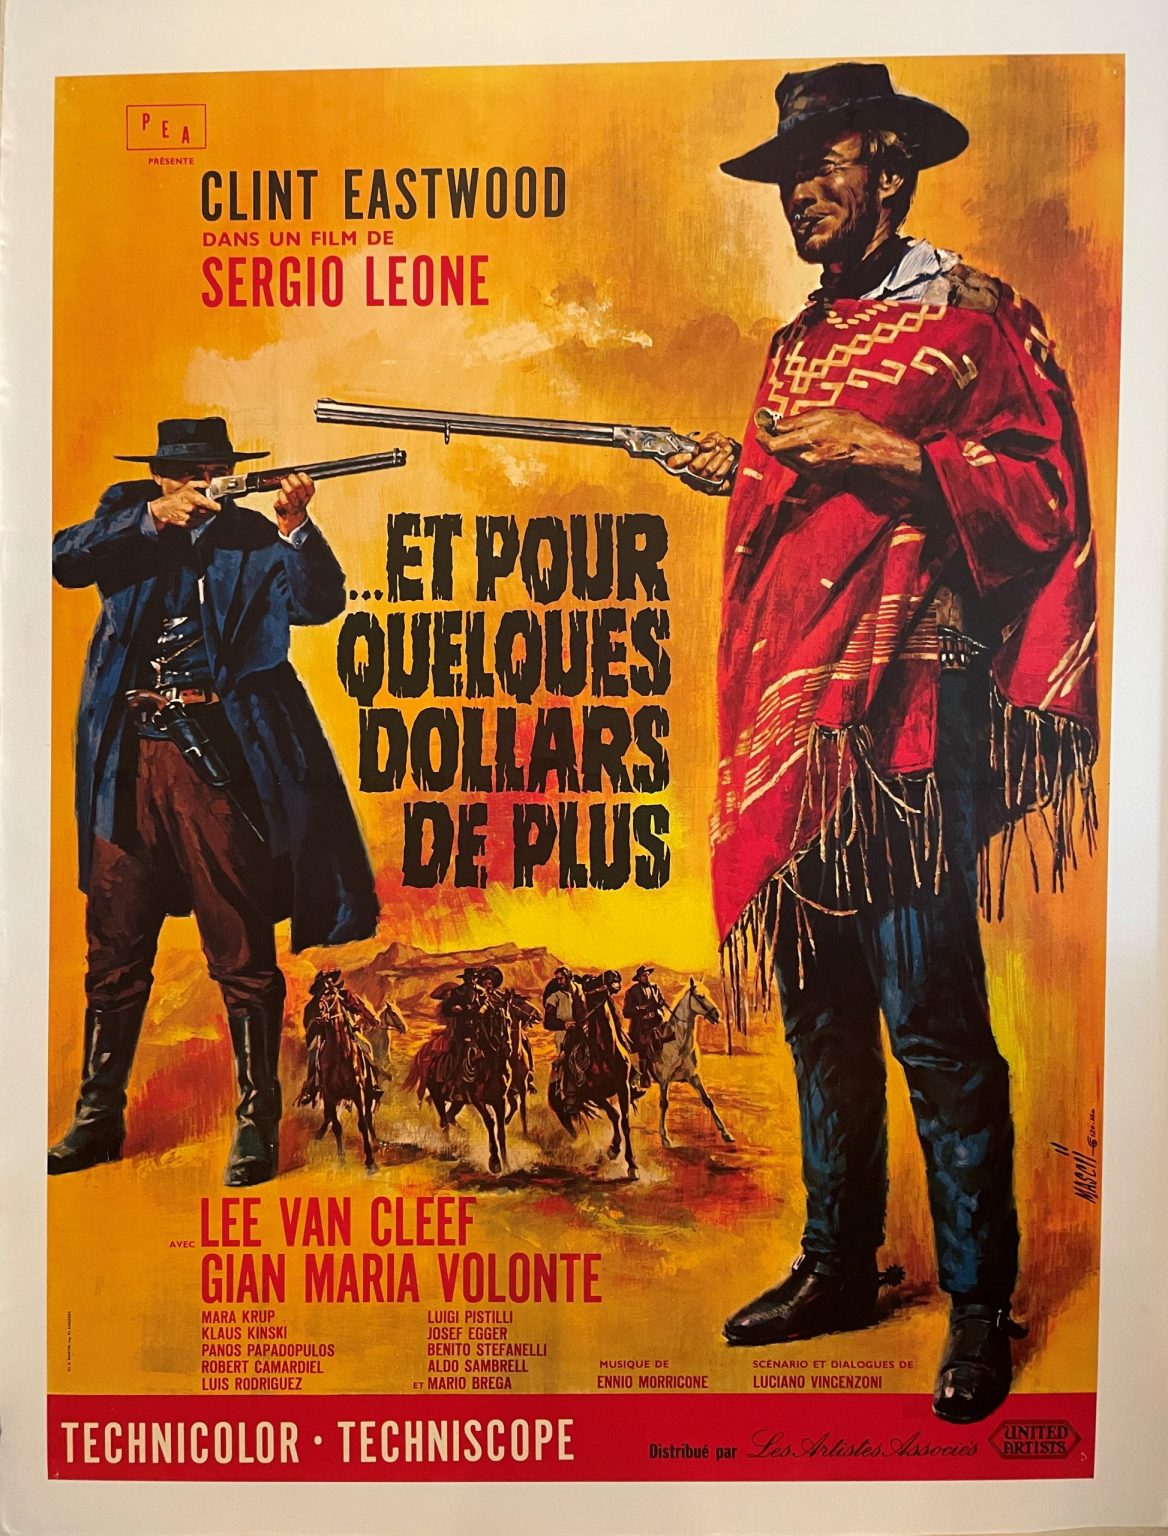 FOR A FEW DOLLARS MORE, Original Spaghetti Western Vintage Movie Poster